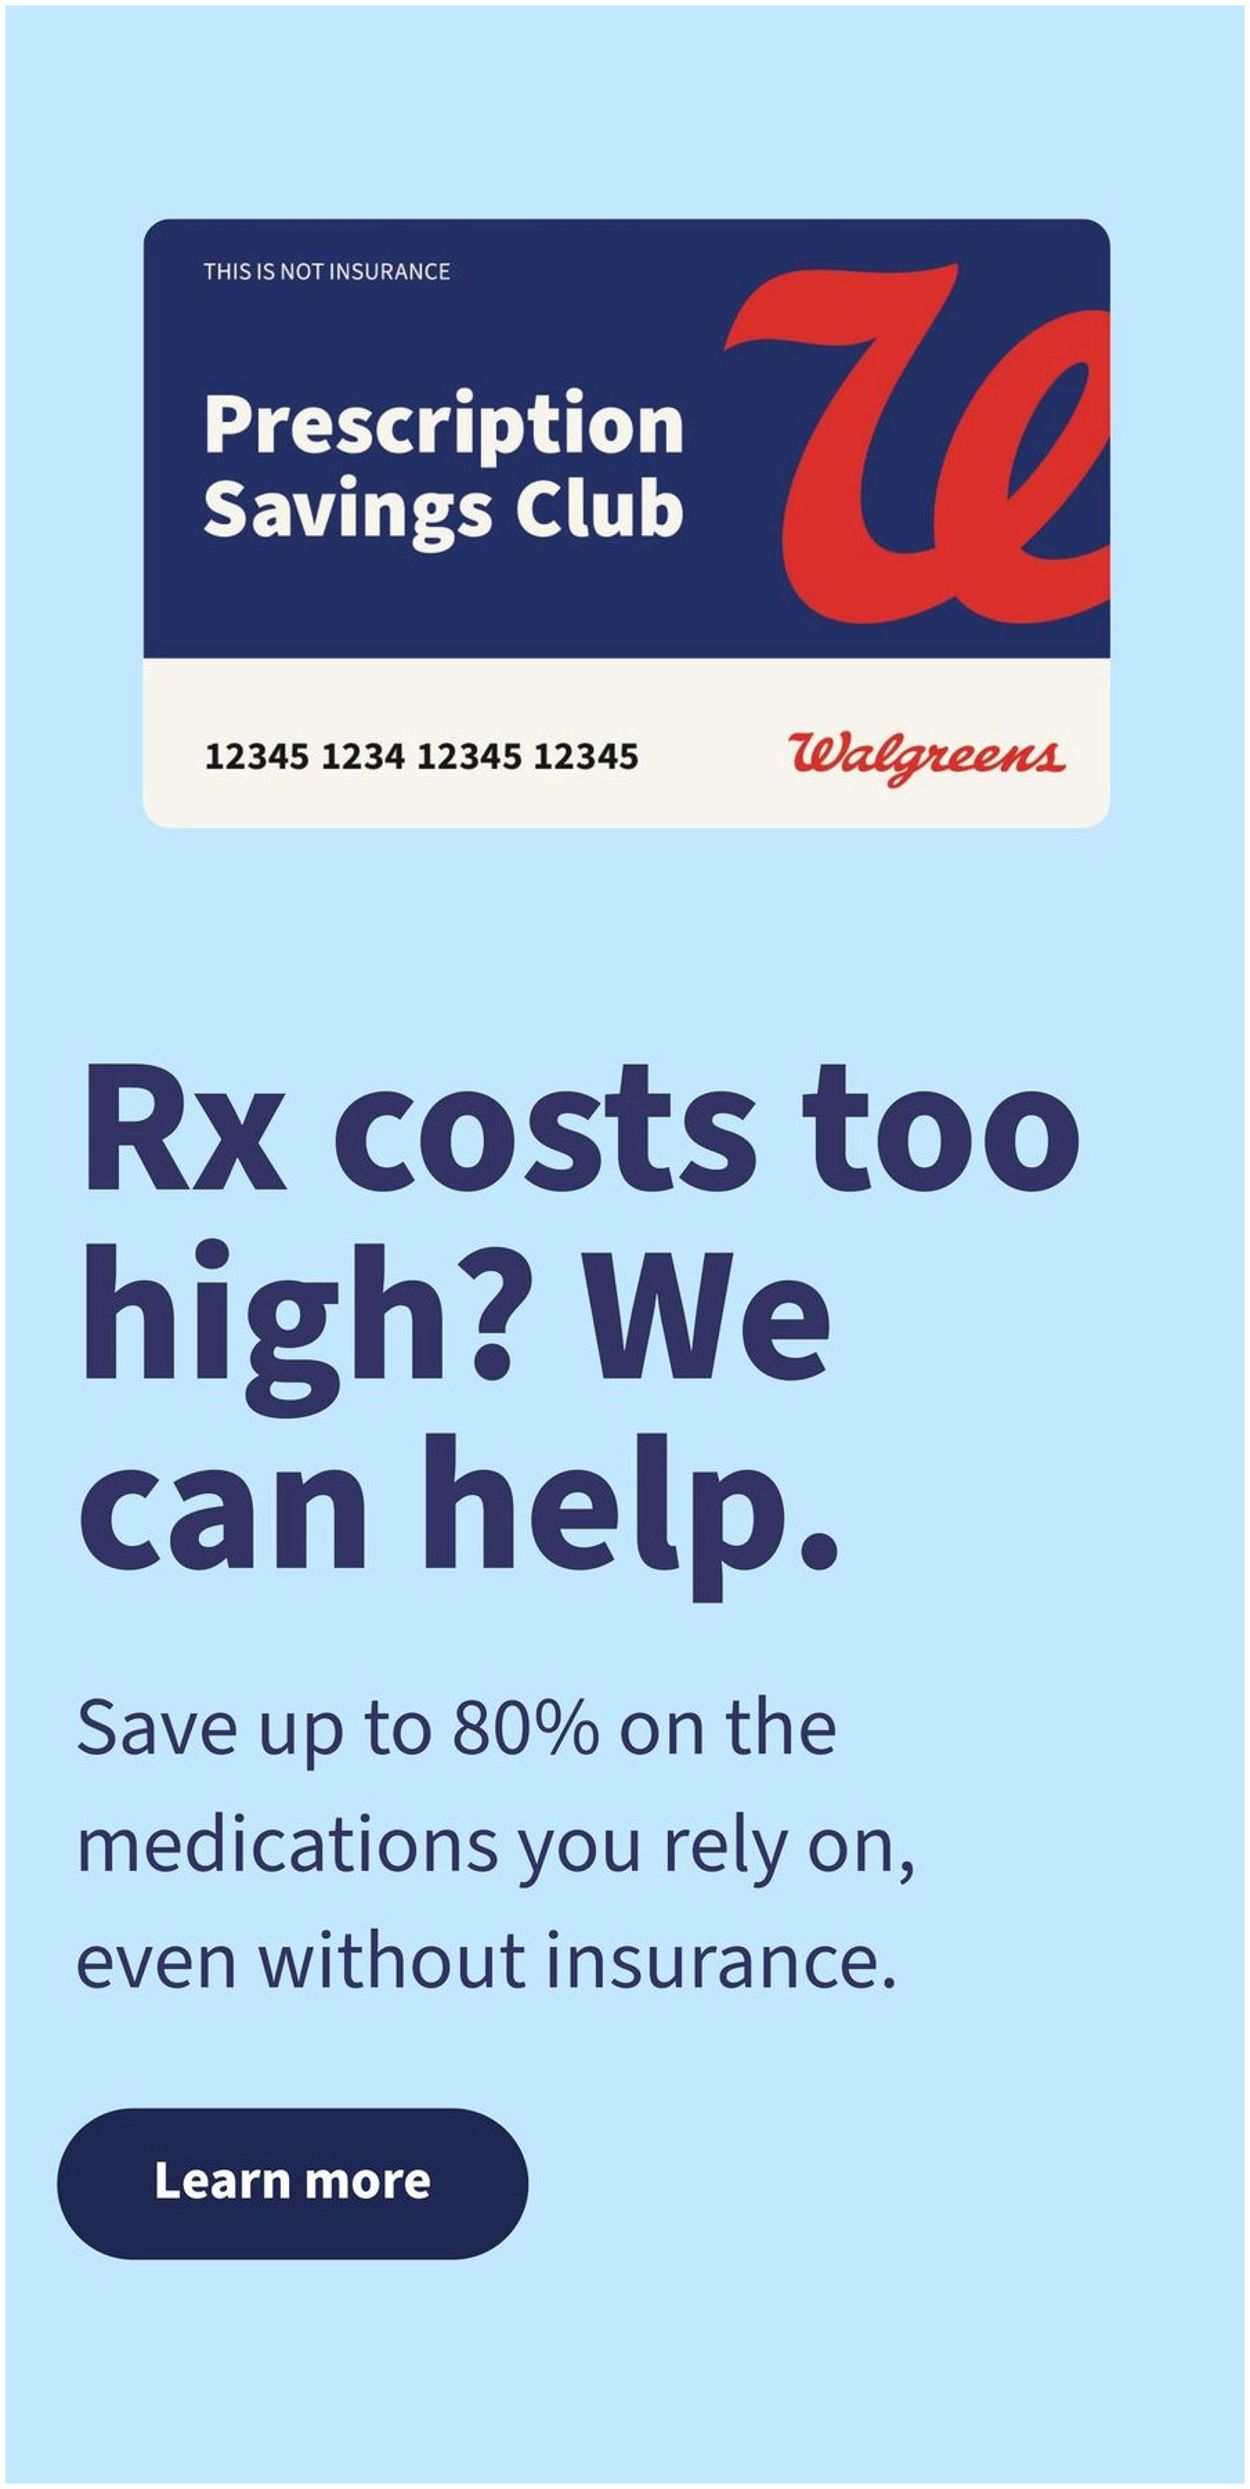 Walgreens Ad from 02/14/2021